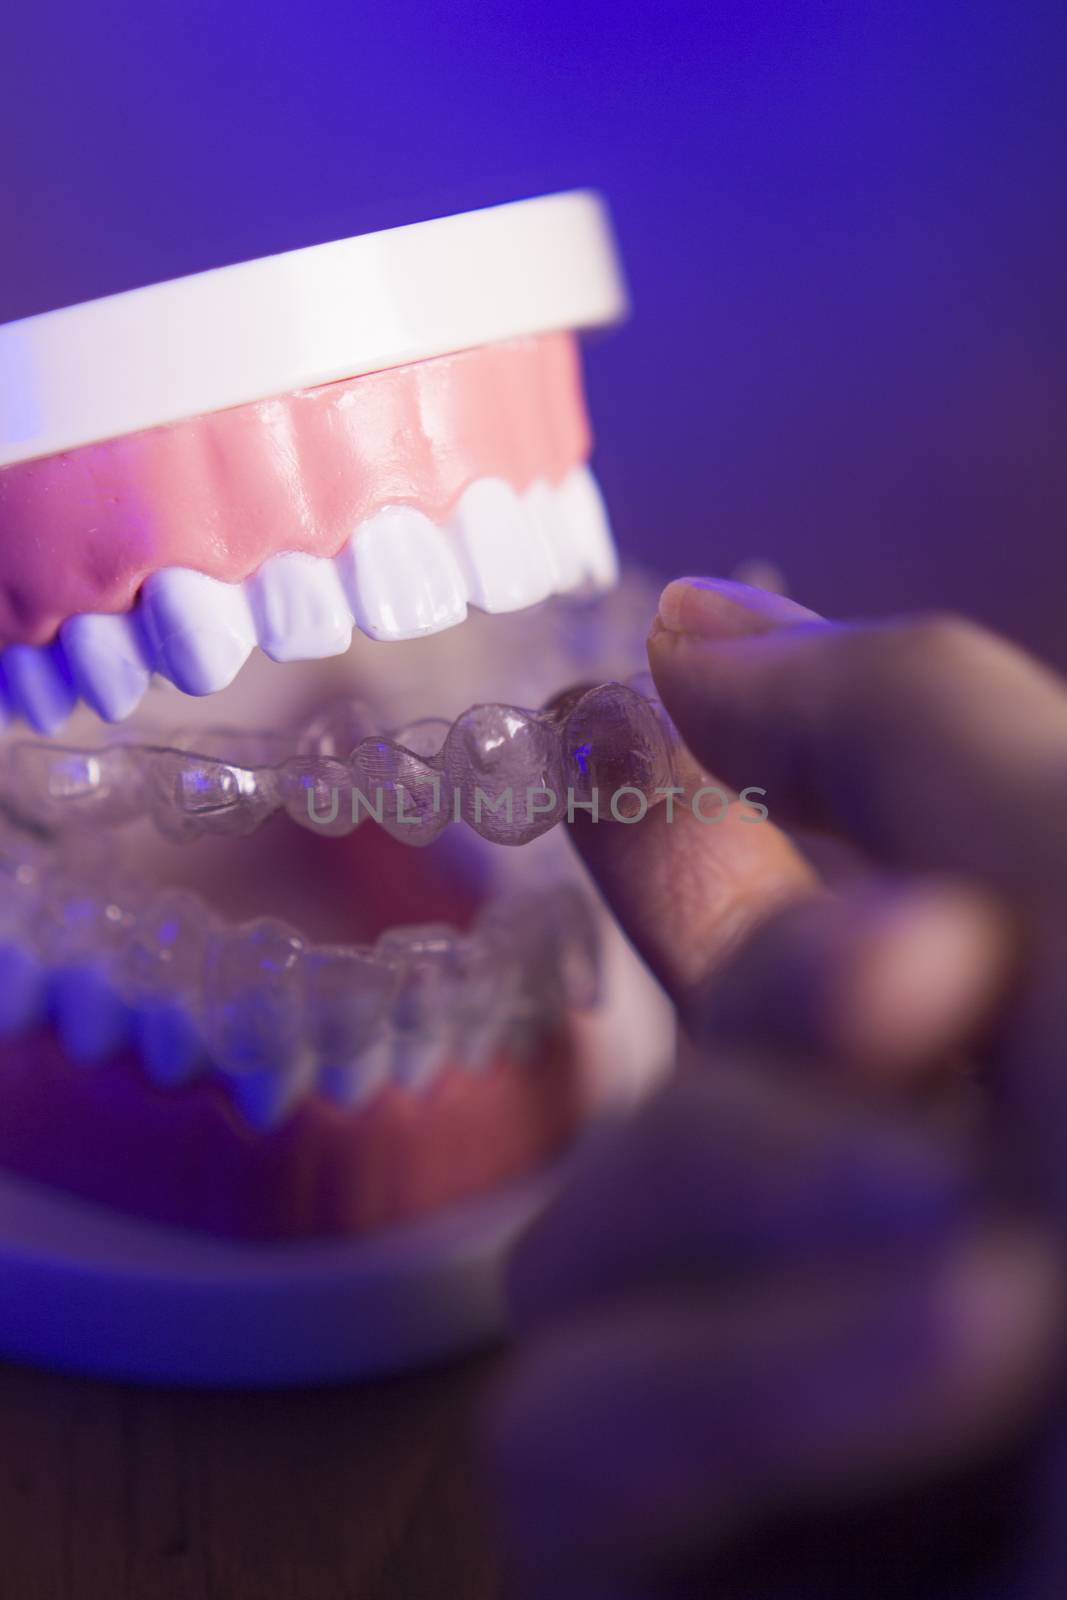 Denture for dentistry students with transparent orthodontics